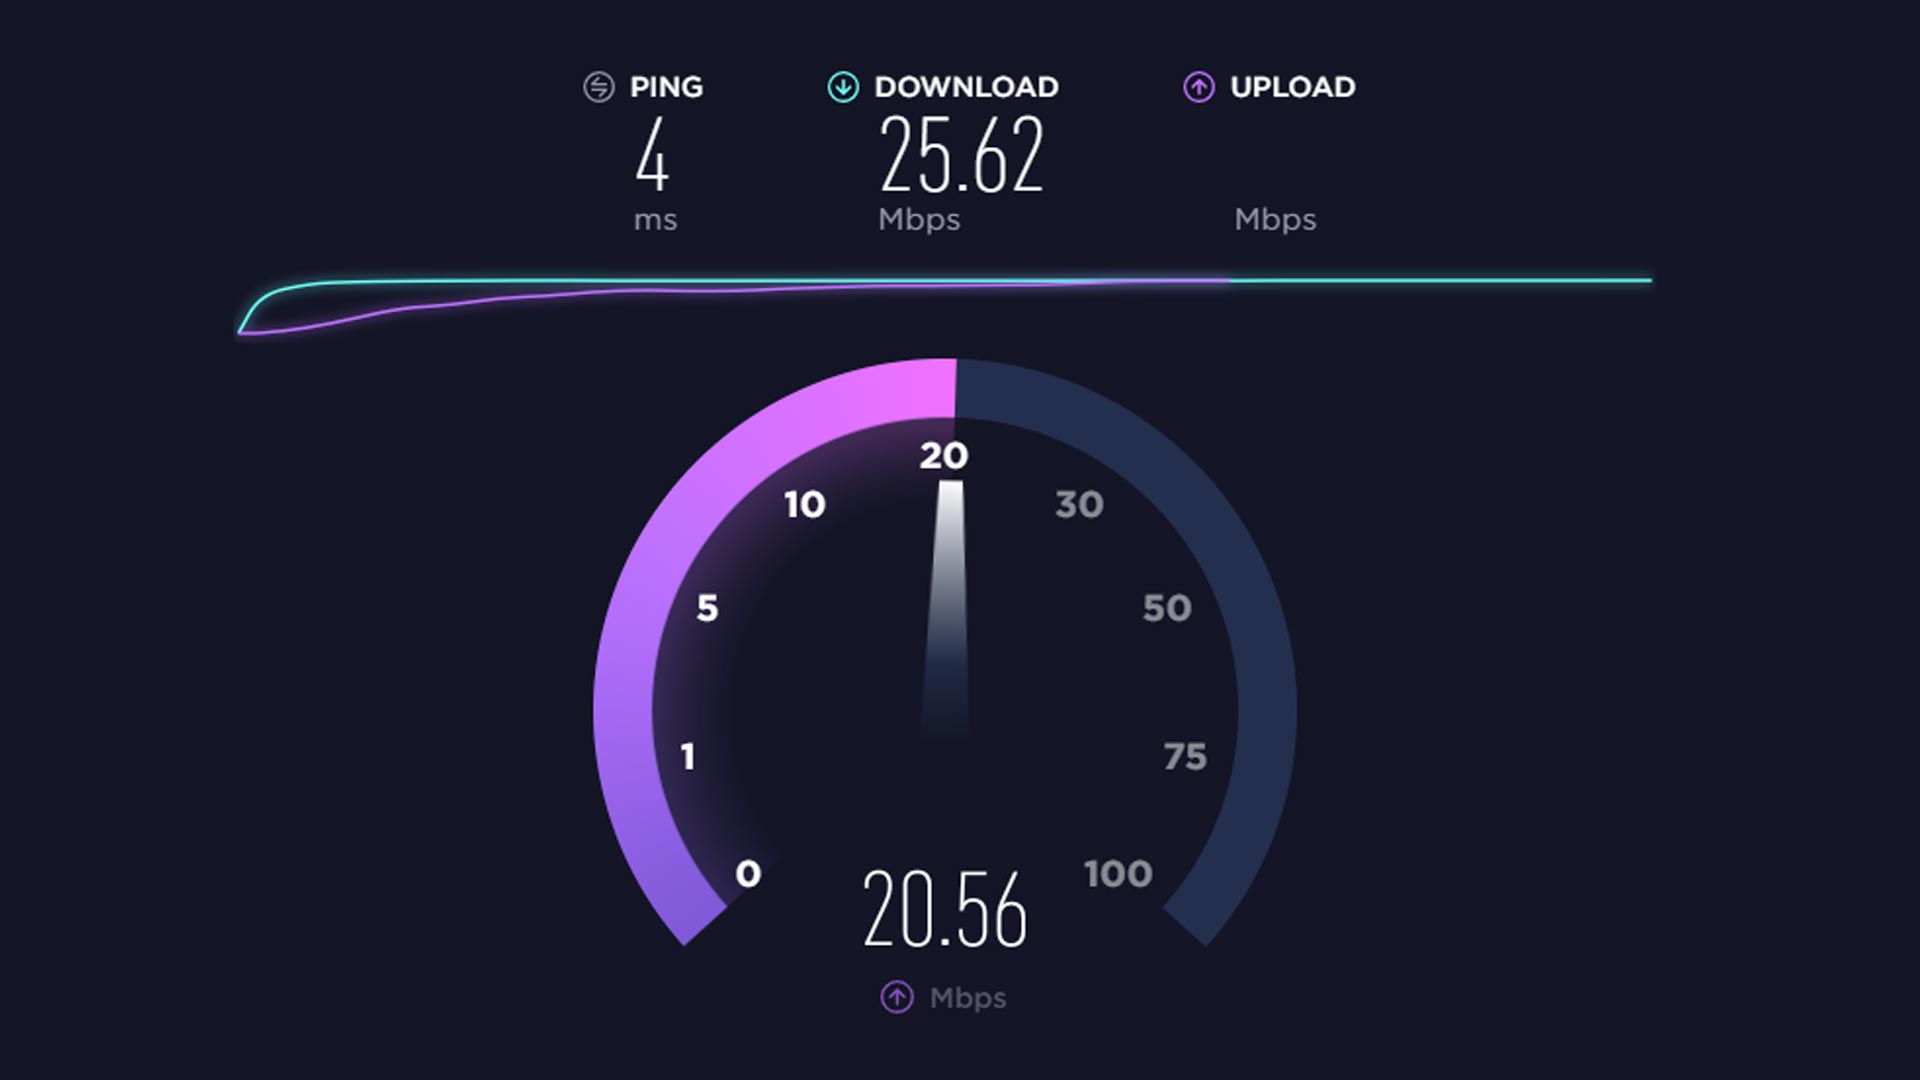 my upload is faster than download bitcomet